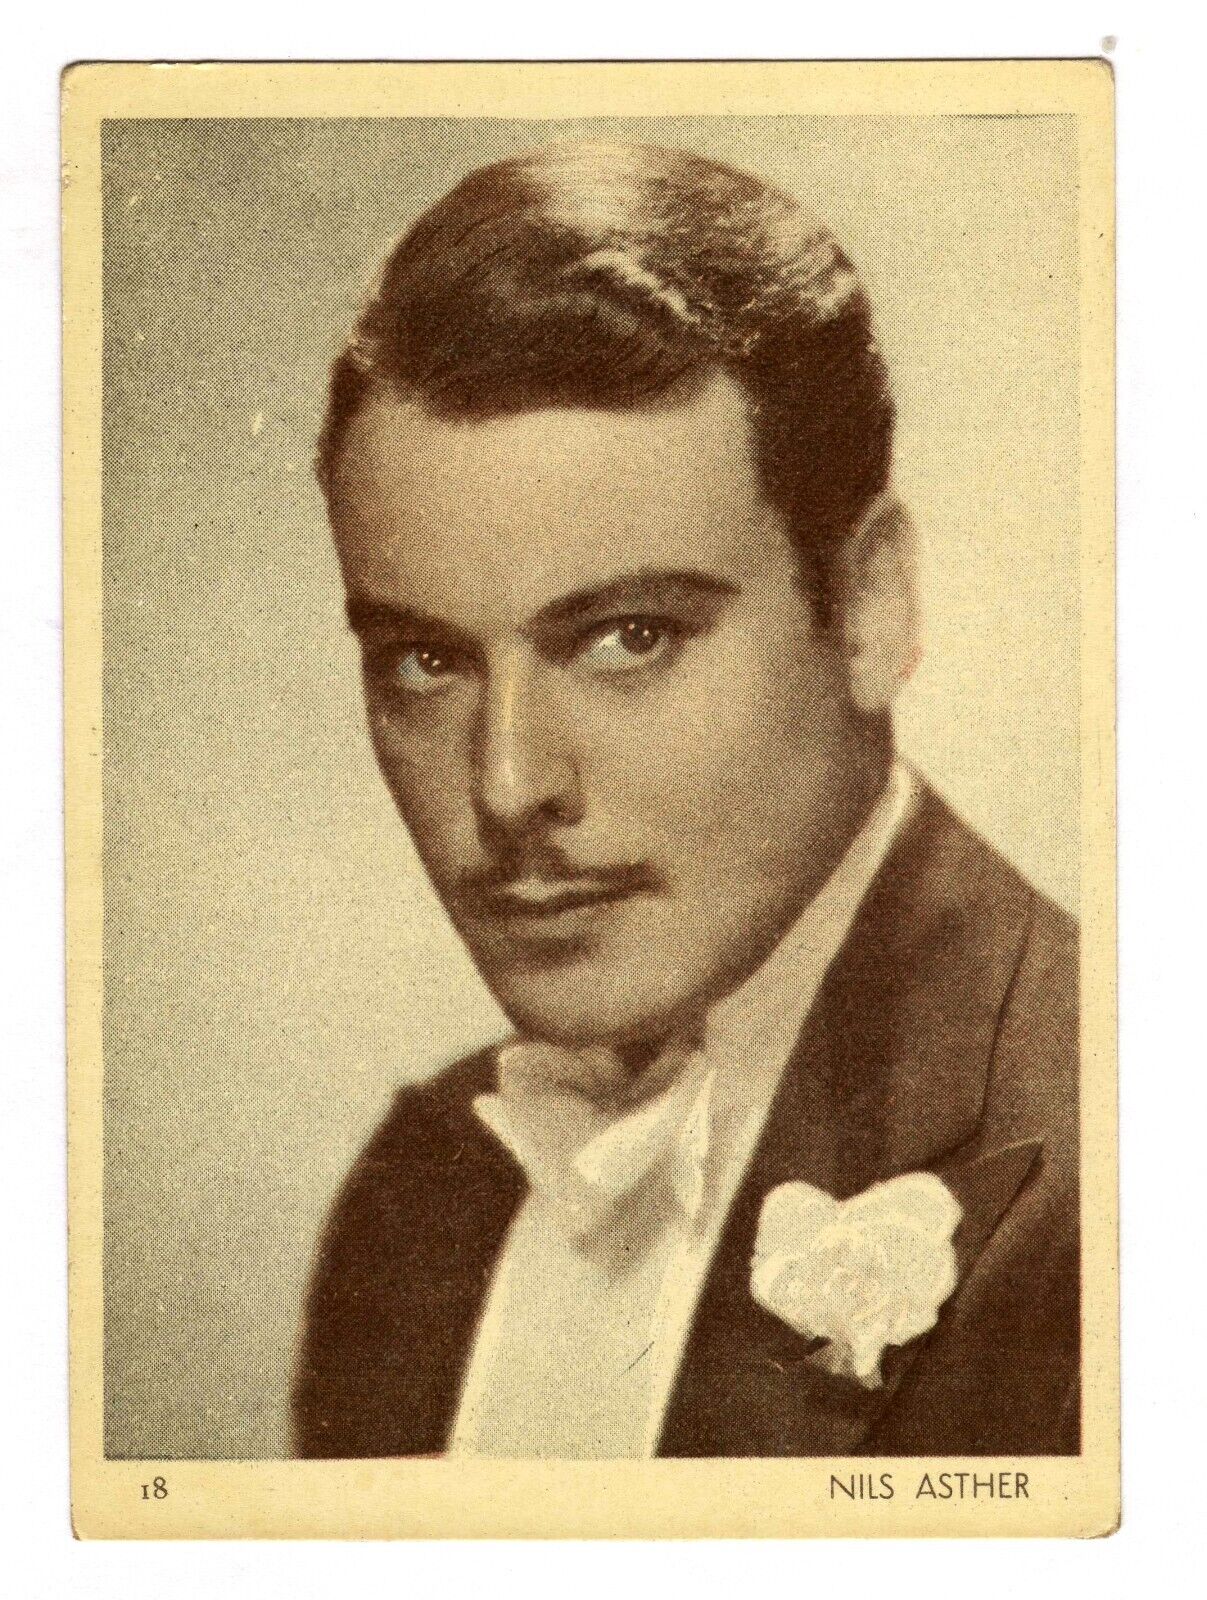 NILS ASTHER 1930 CARD FROM CHOCOLATE AGUILA URUGUAY COLLECTION ASTROS DEL CINE